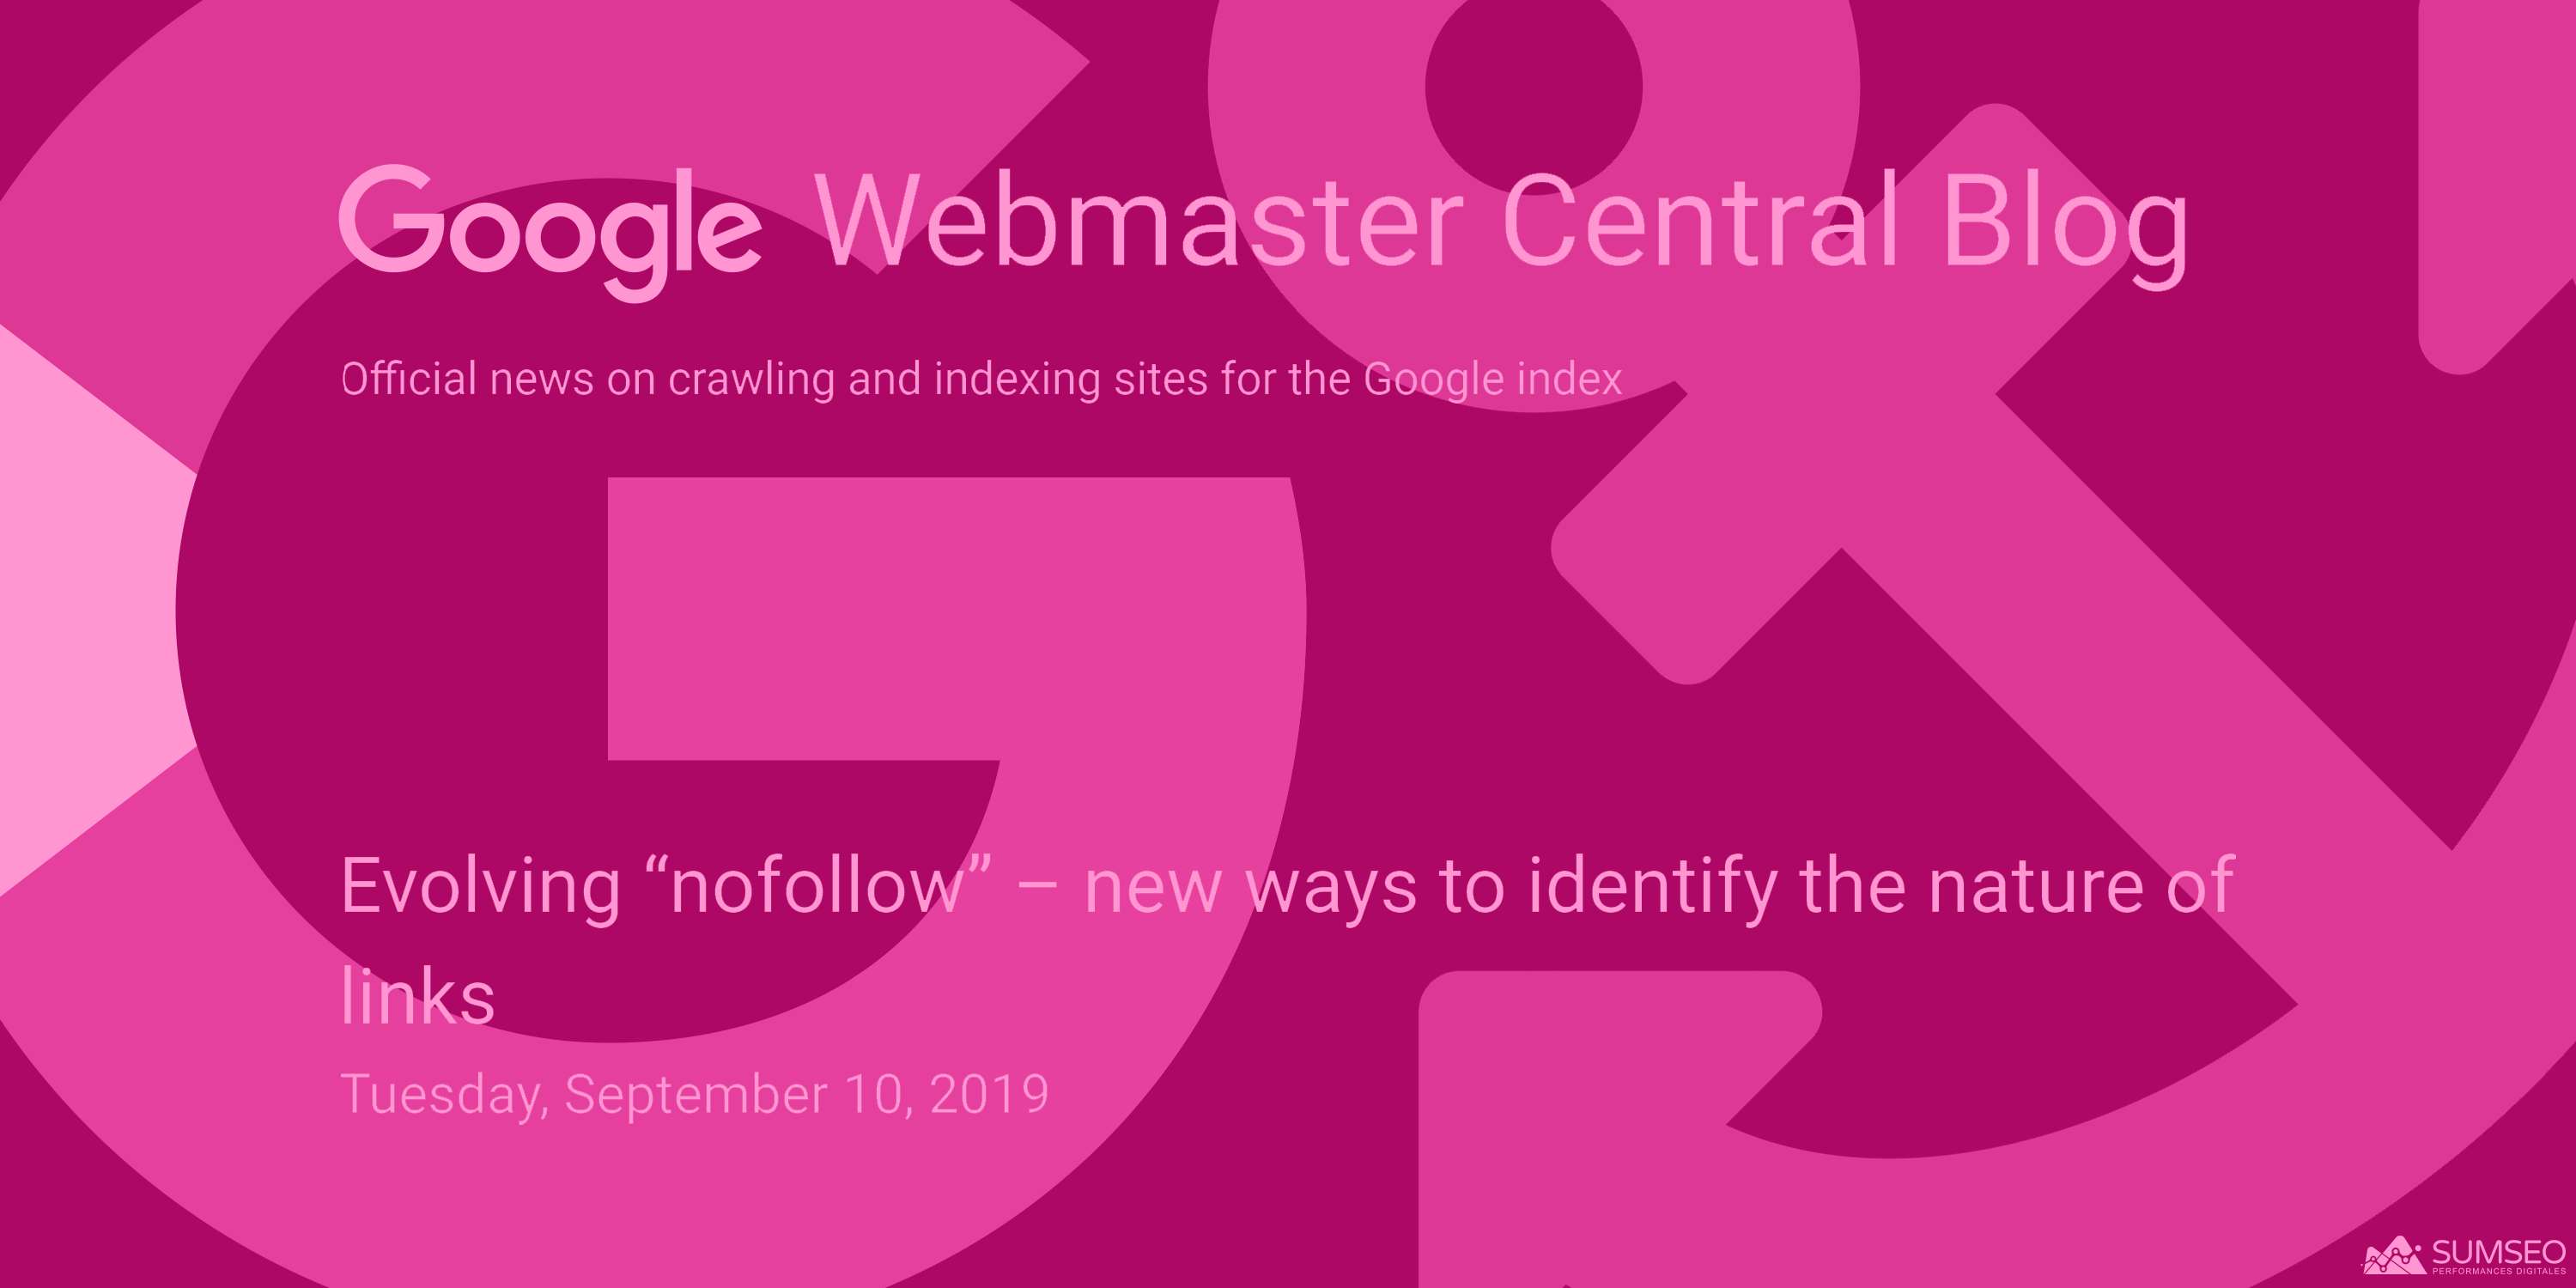 Evolving "nofollow" - new ways to identify the nature of links (liens nofollow, sponsored, ugc)